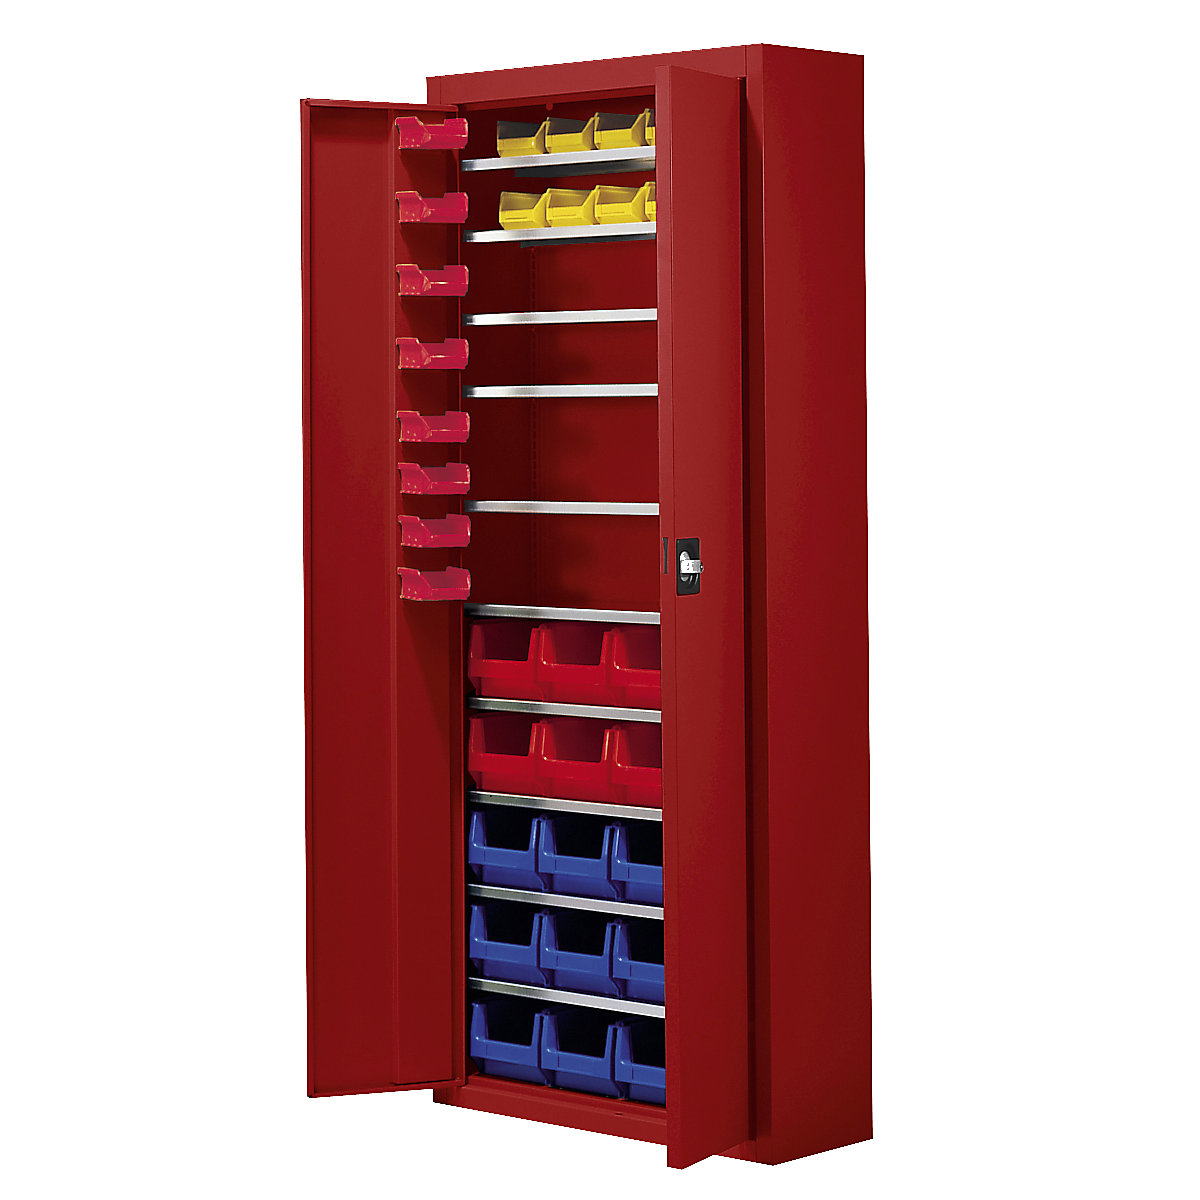 Storage cupboard with open fronted storage bins – mauser, HxWxD 1740 x 680 x 280 mm, 48 bins, single colour, flame red-1